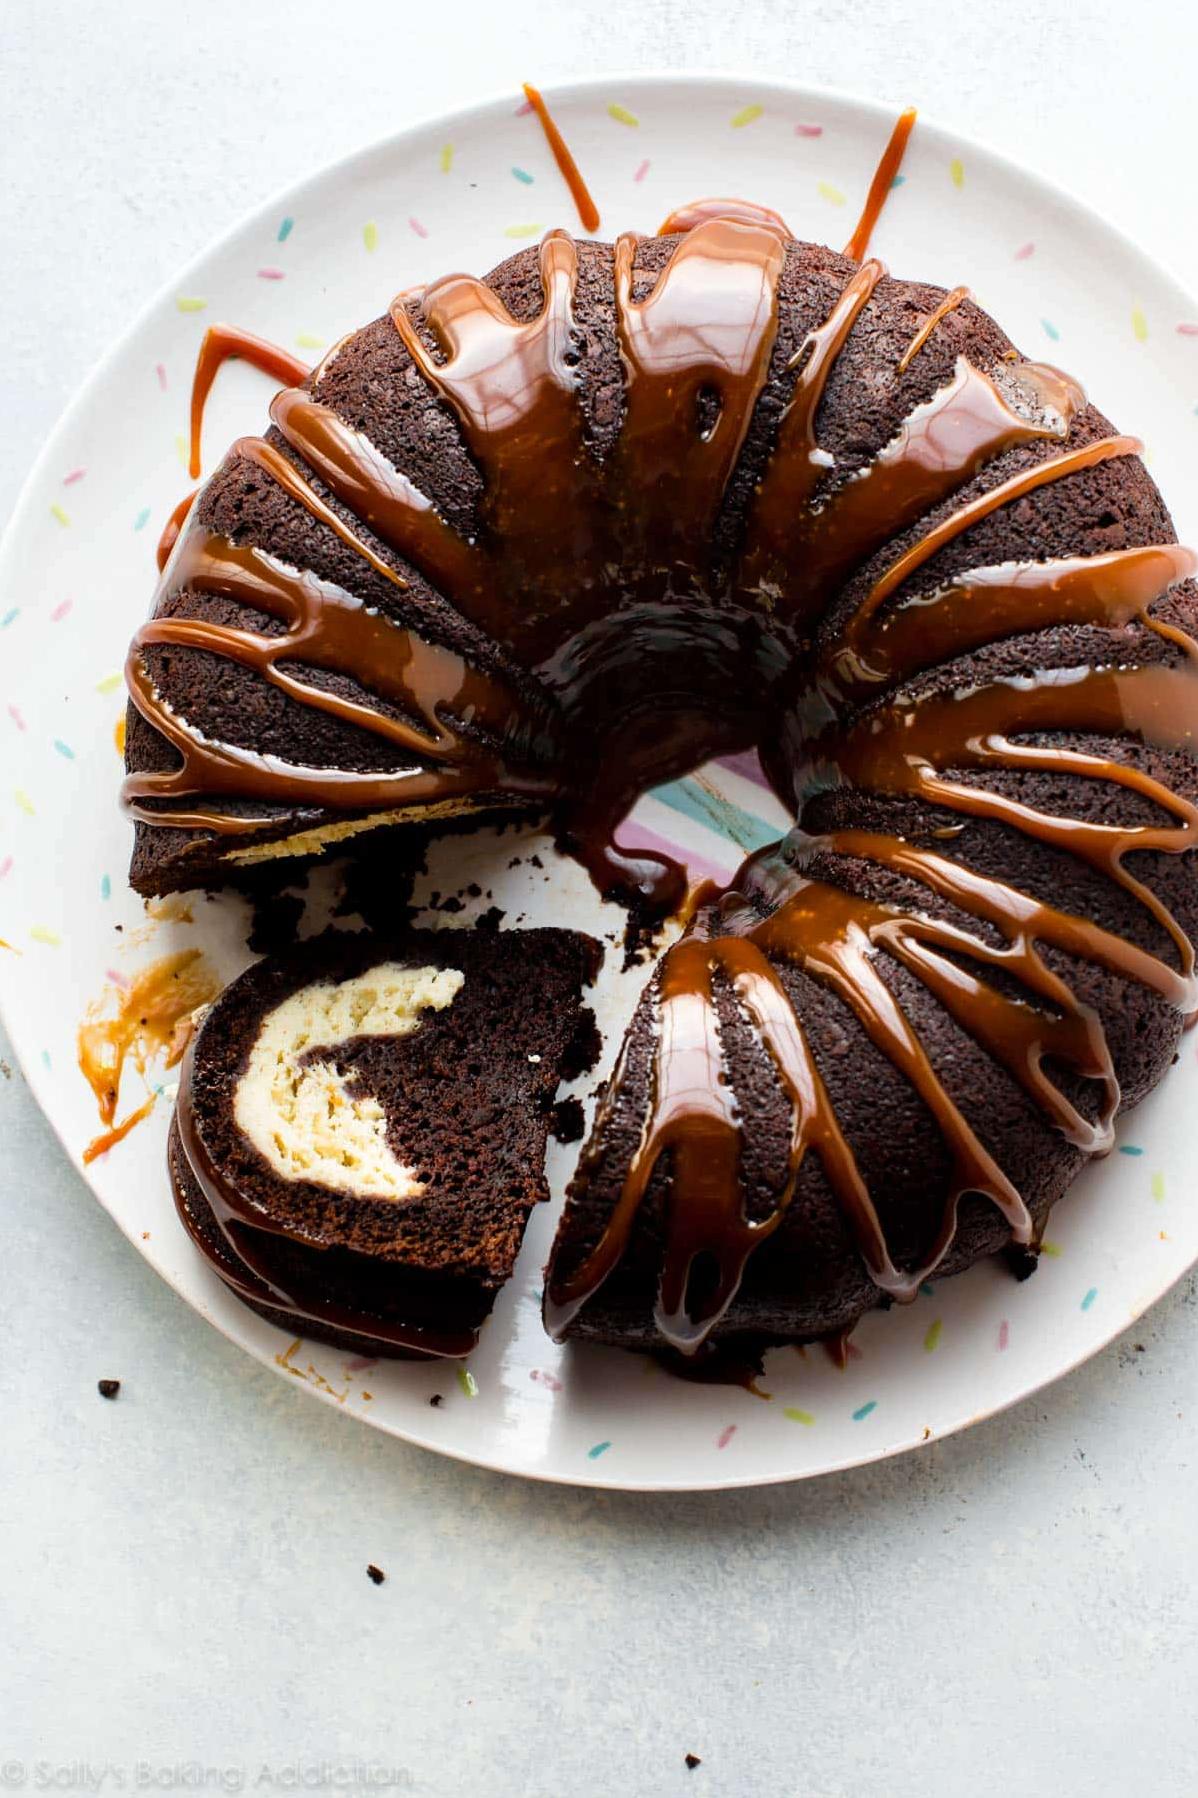  Cutting into this pound cake reveals a delicious surprise